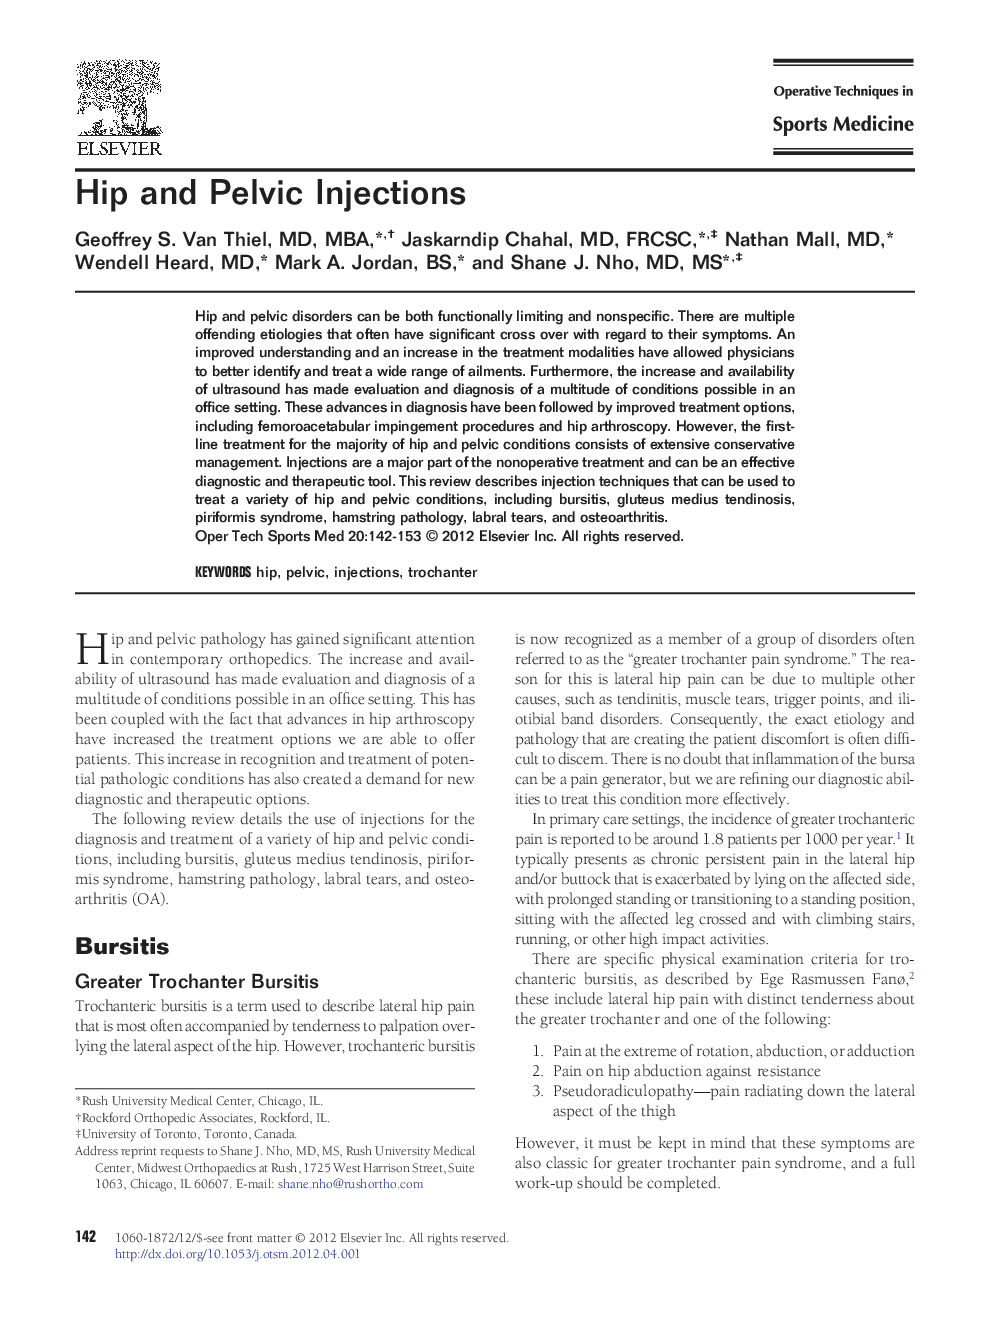 Hip and Pelvic Injections